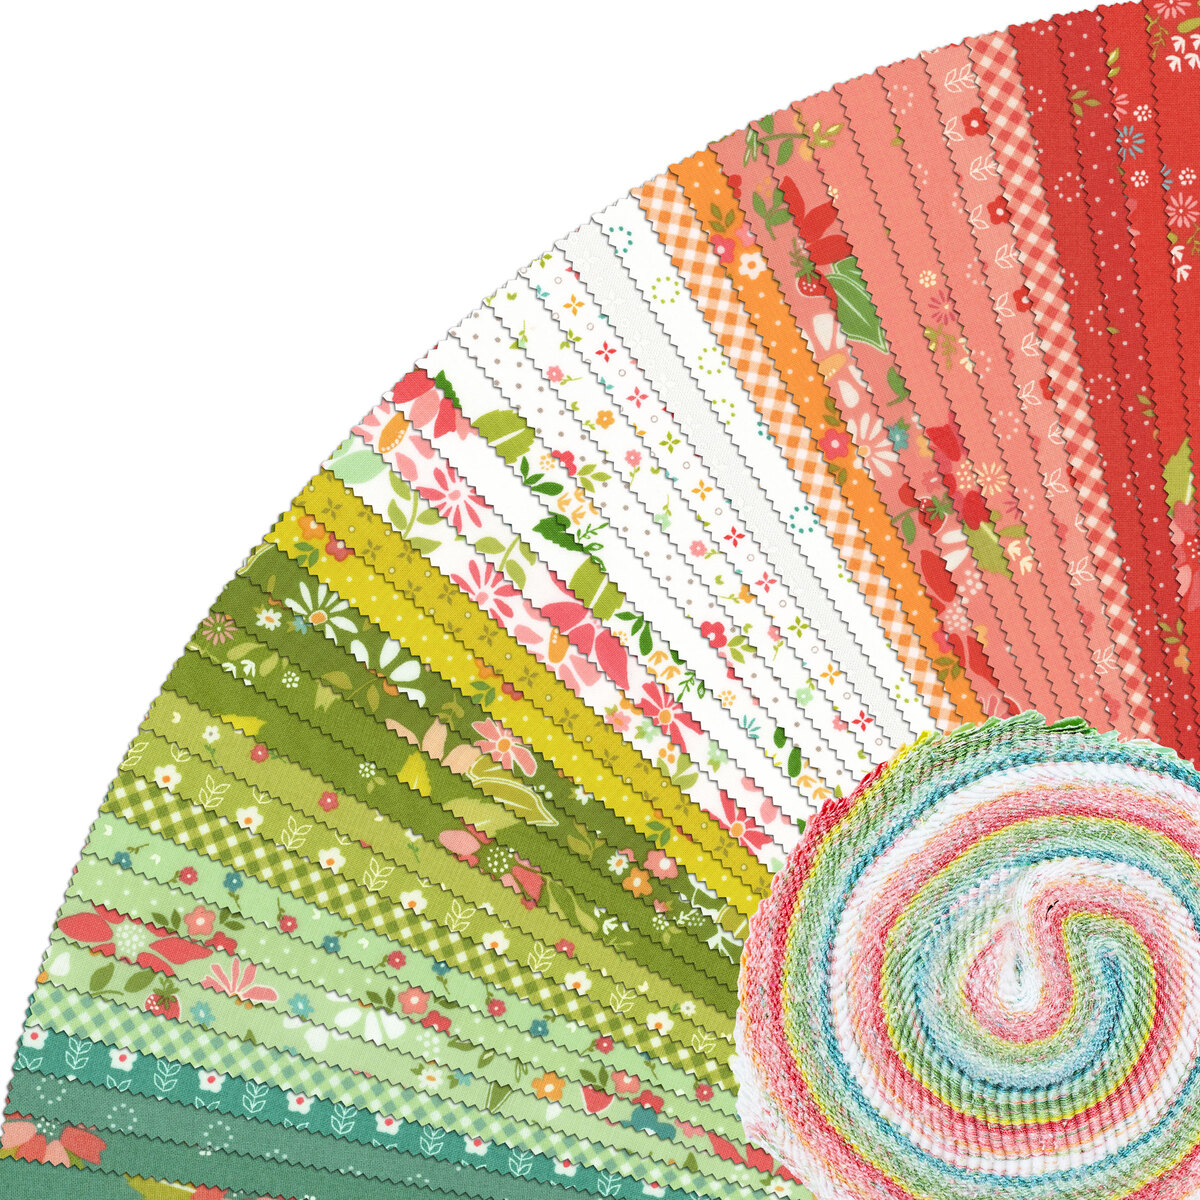 20 Patterns Jelly Roll Fabric, Pre-Cut Jelly Roll Fabric Strips